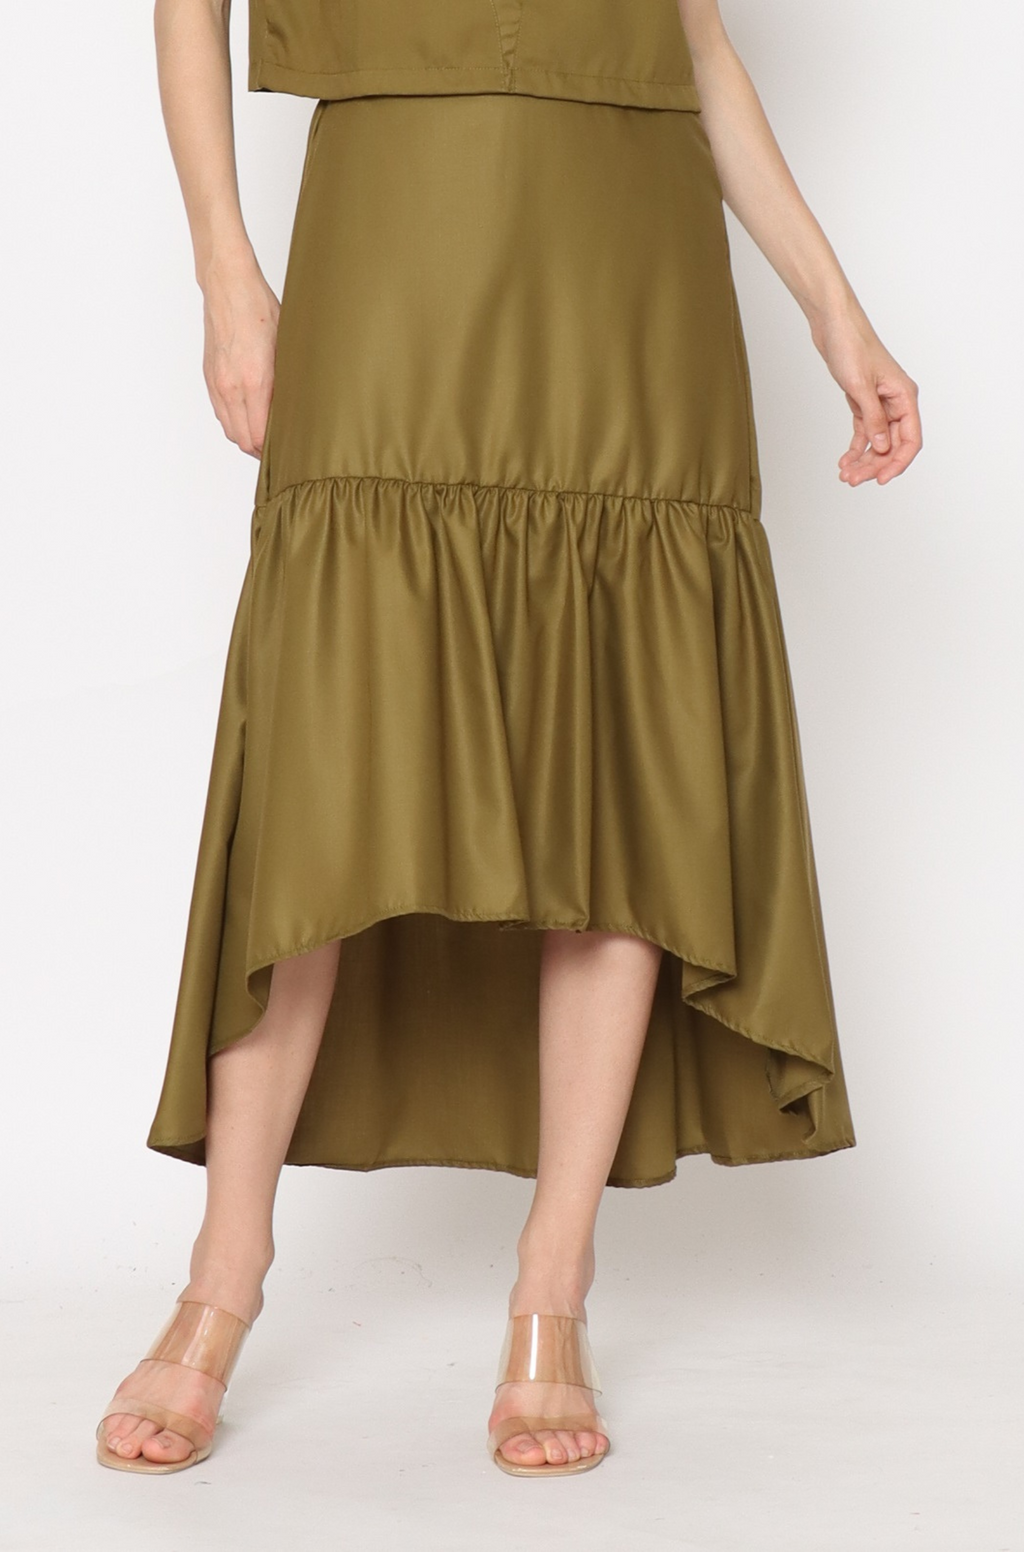 Nora. Frill Skirt with Frayed Details - Olive